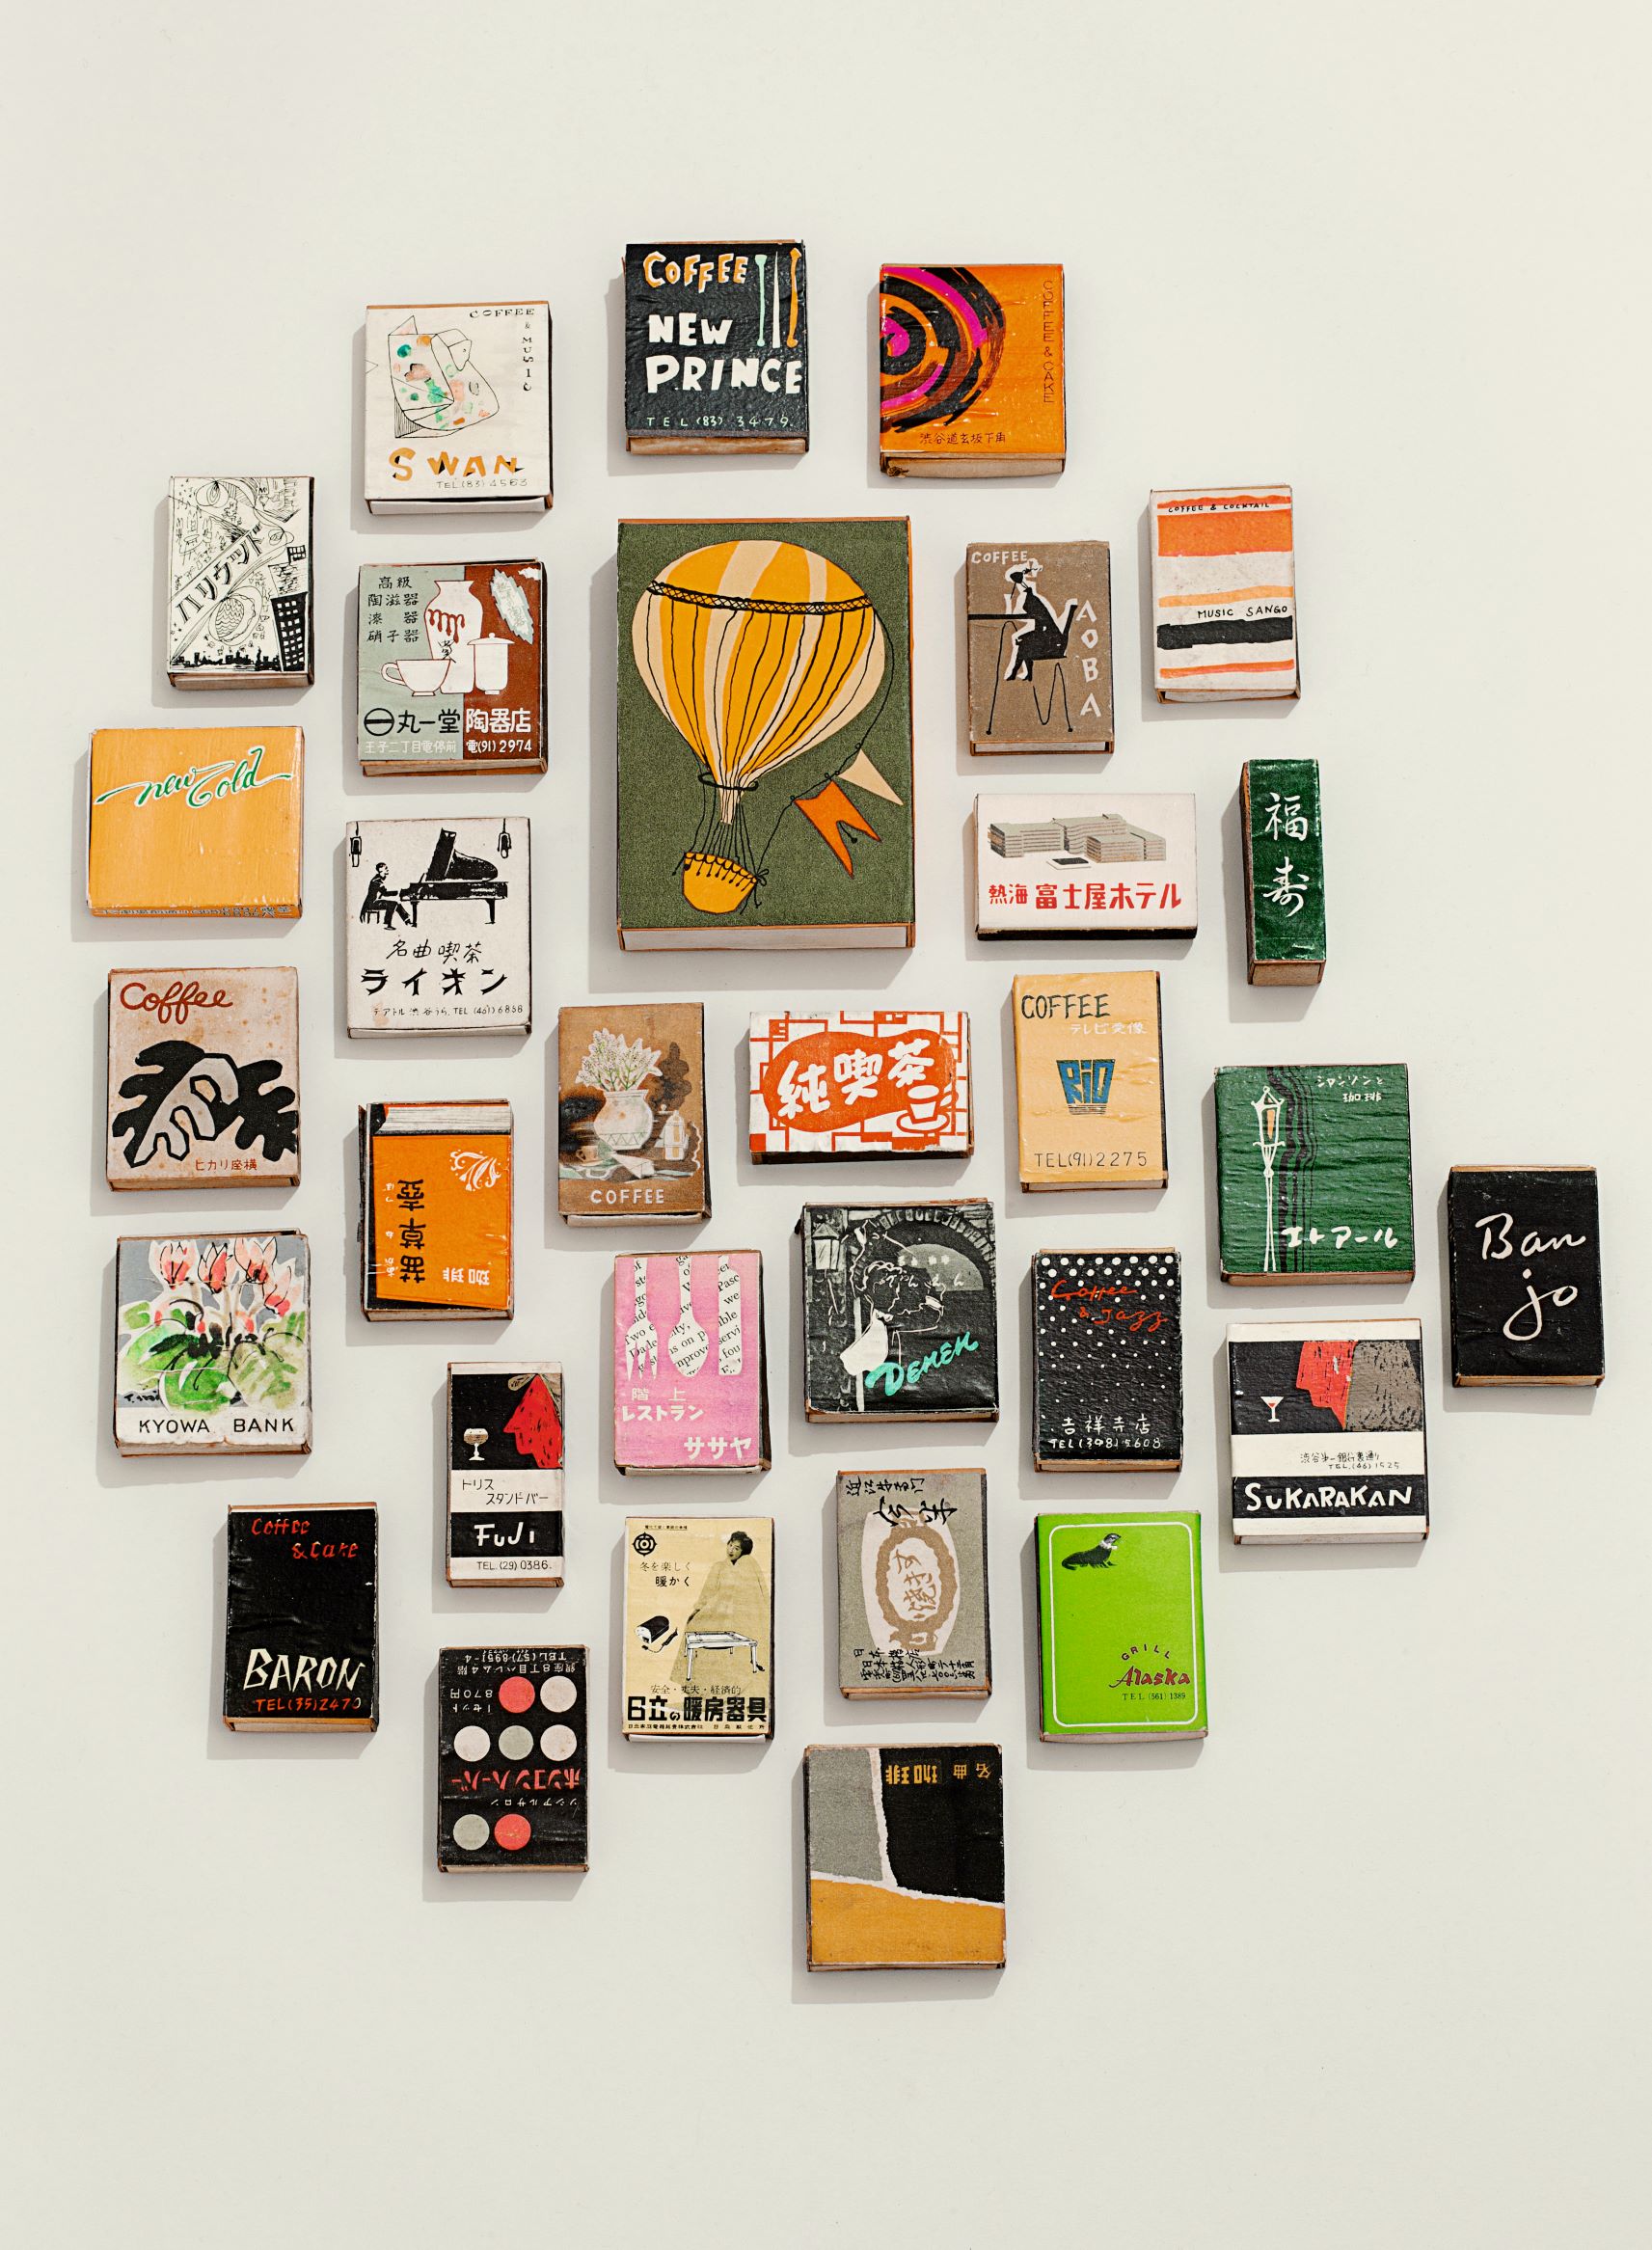 Paul Smith's Matchbox Collection